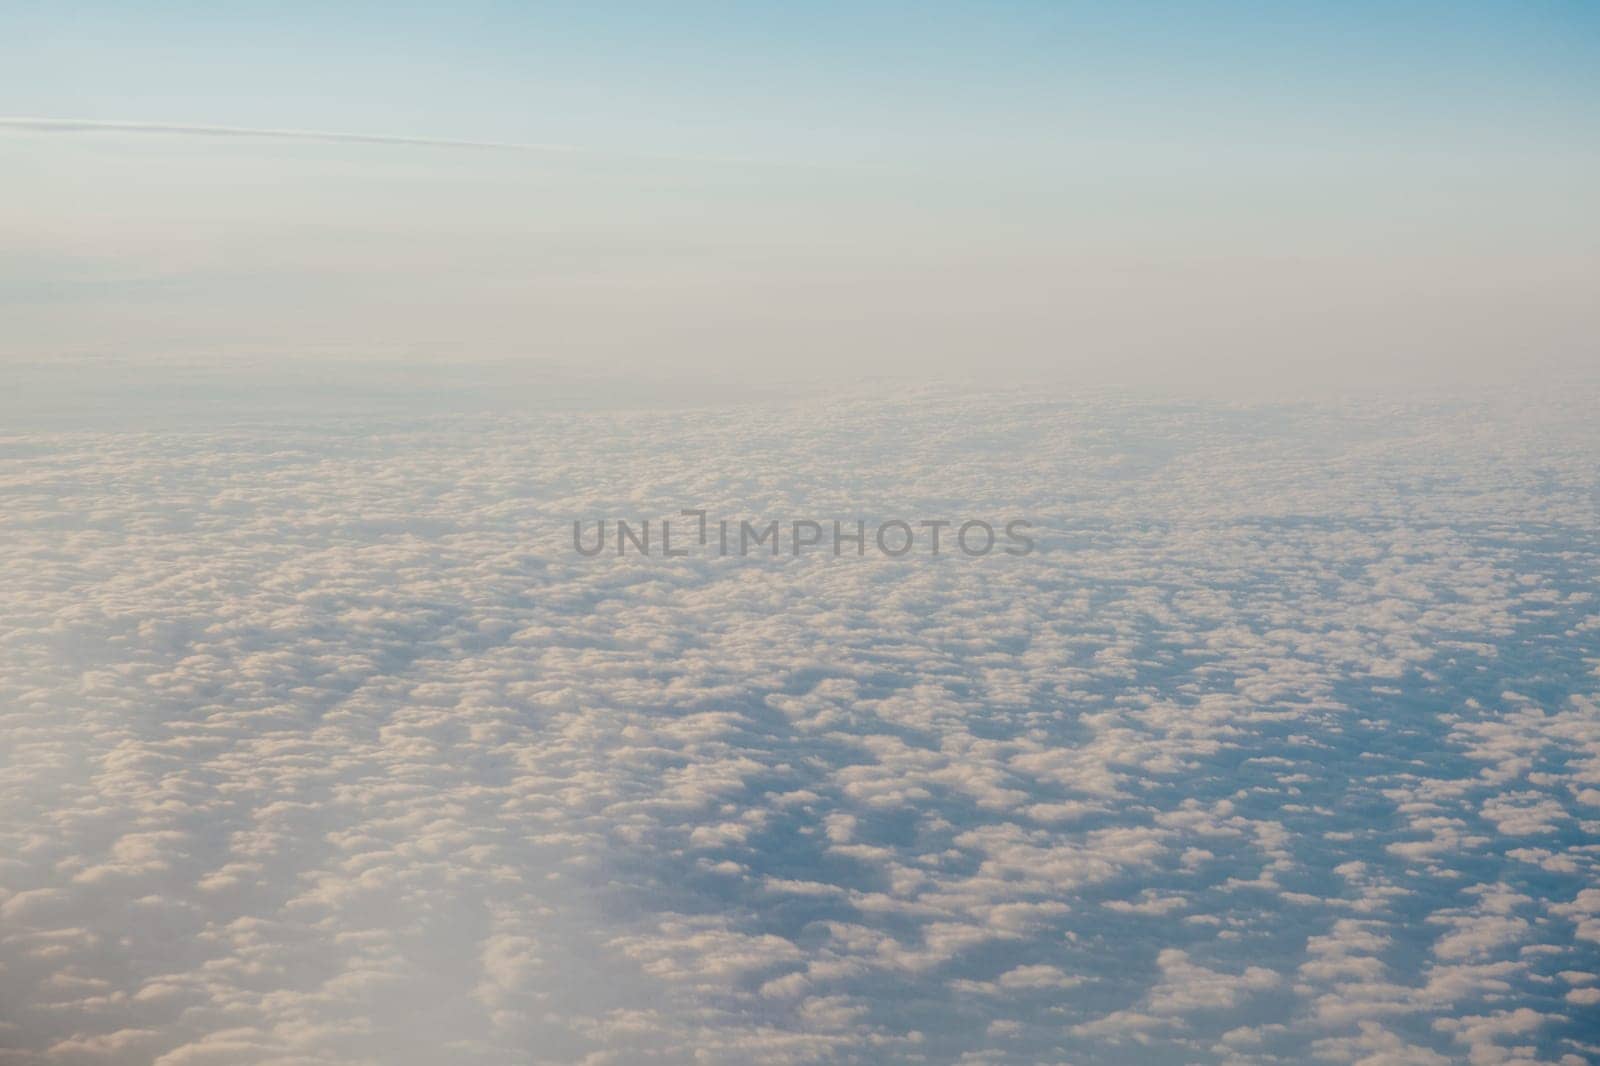 clouds at sunset from the plane in the sky landscape 1